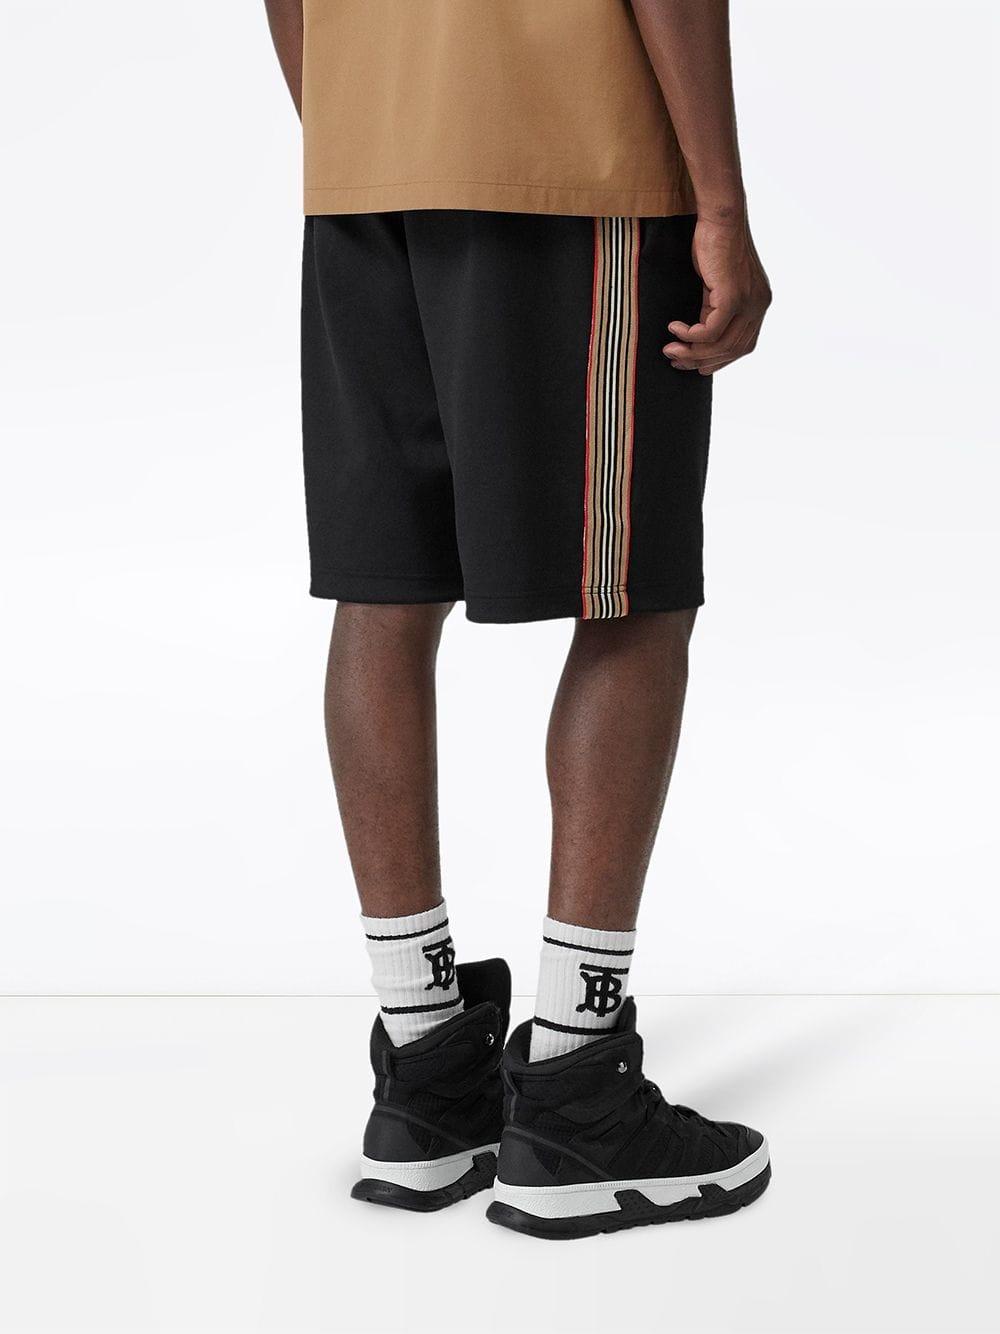 Burberry Cotton Icon Stripe Detail Shorts in Black for Men - Lyst